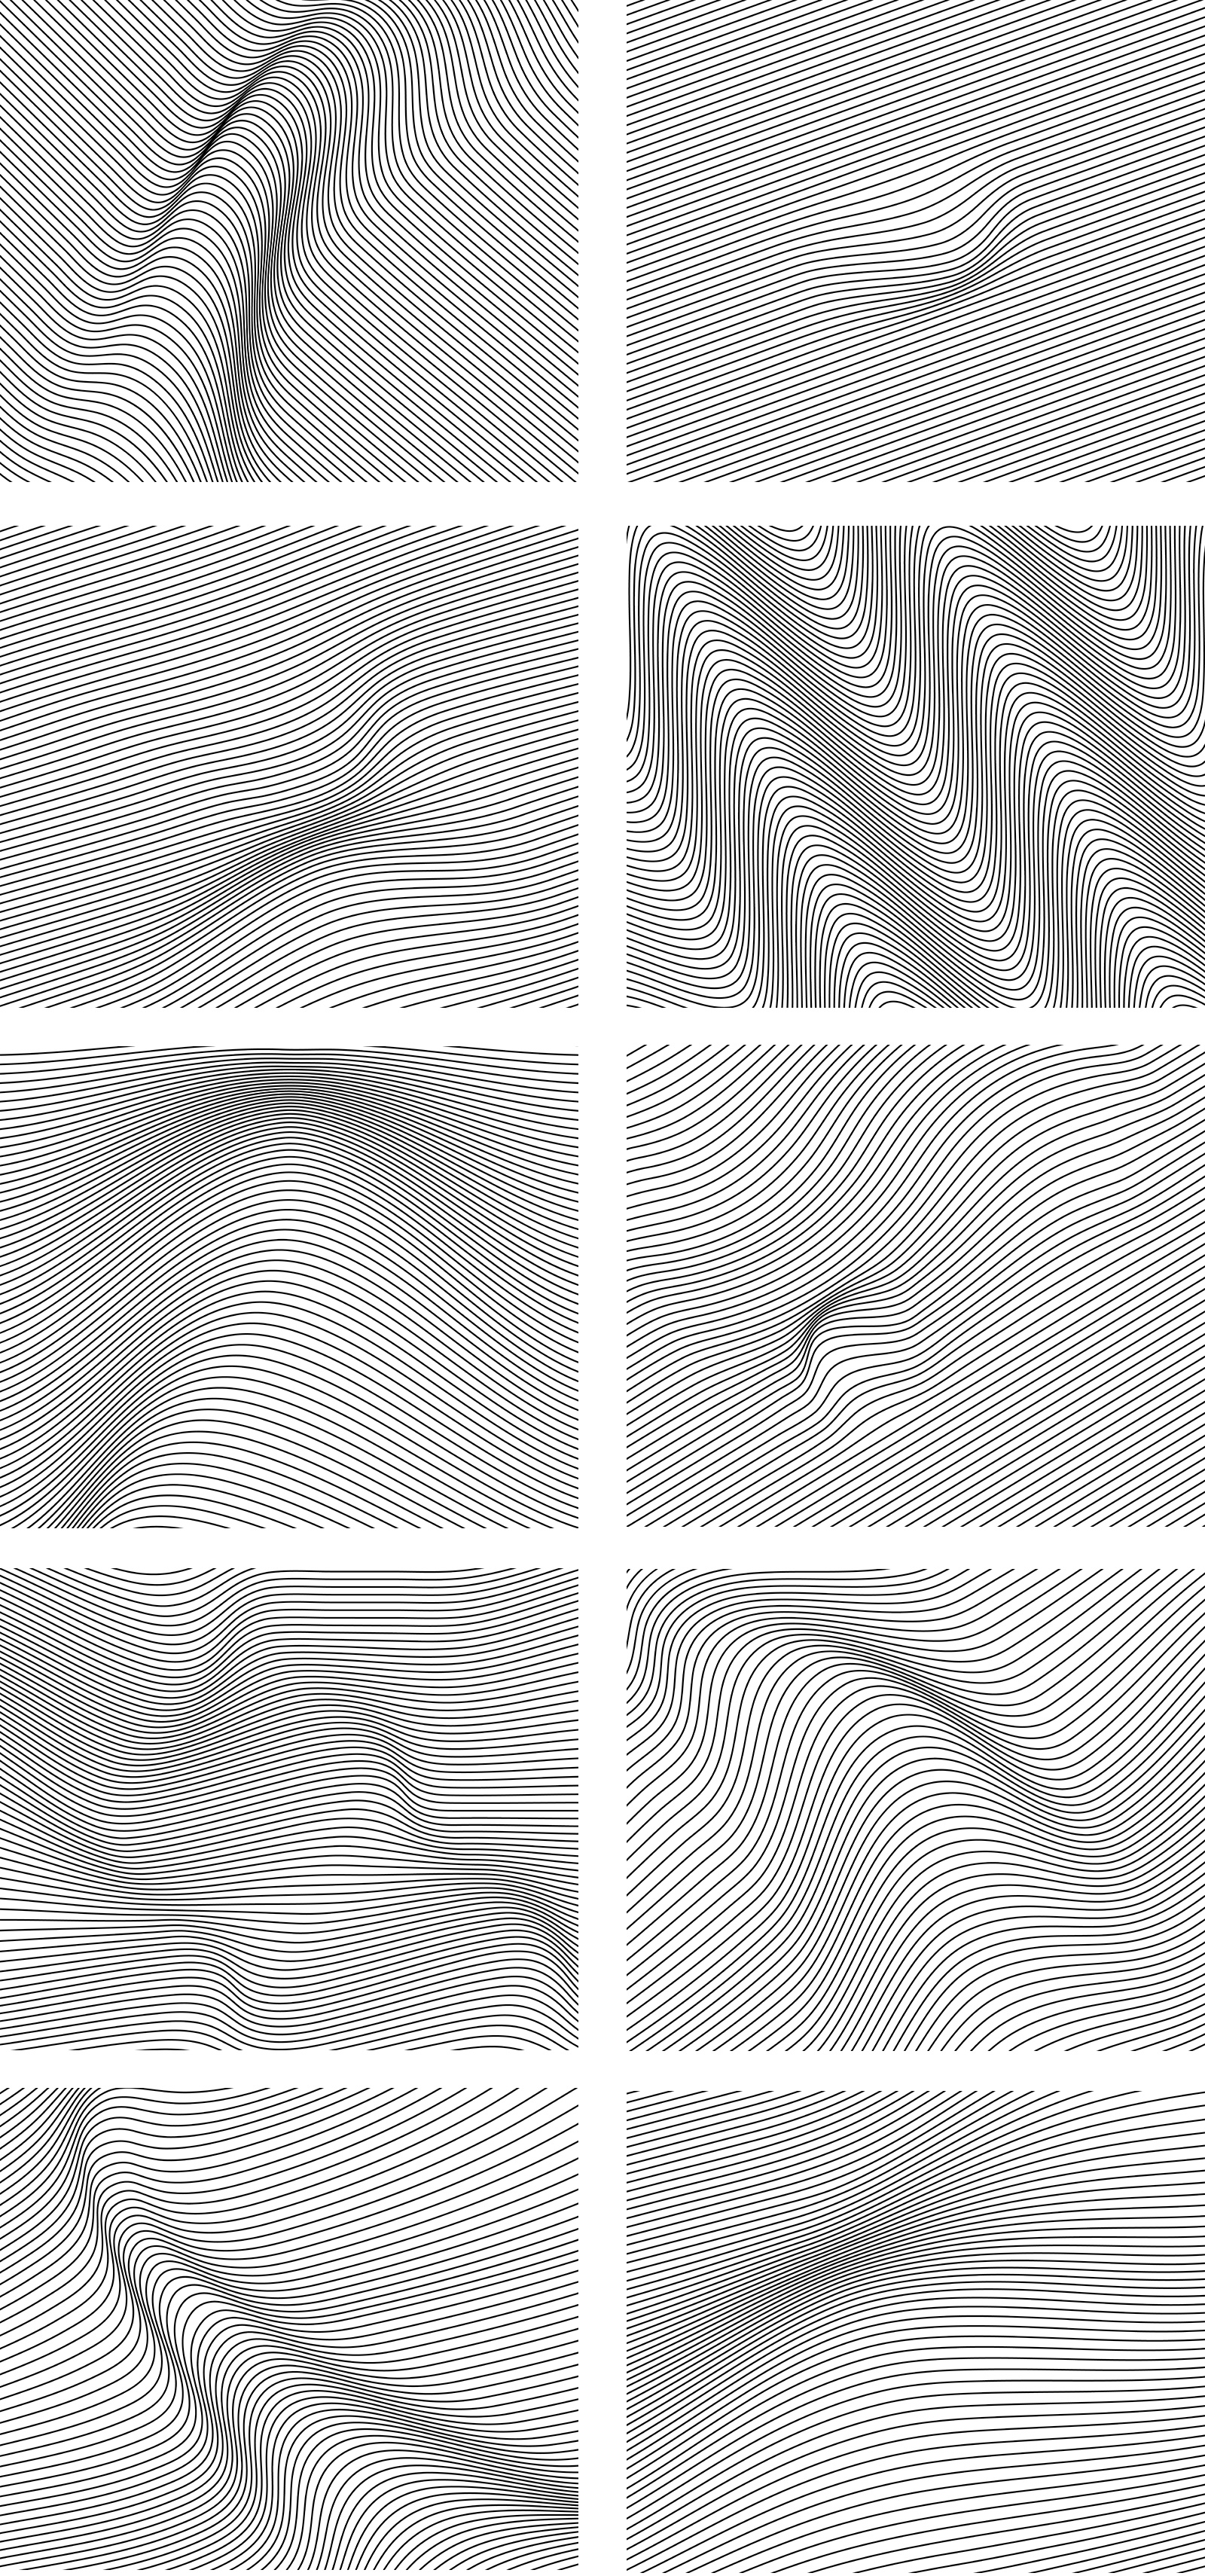 Abstract Distorted Wavy Lines Vector